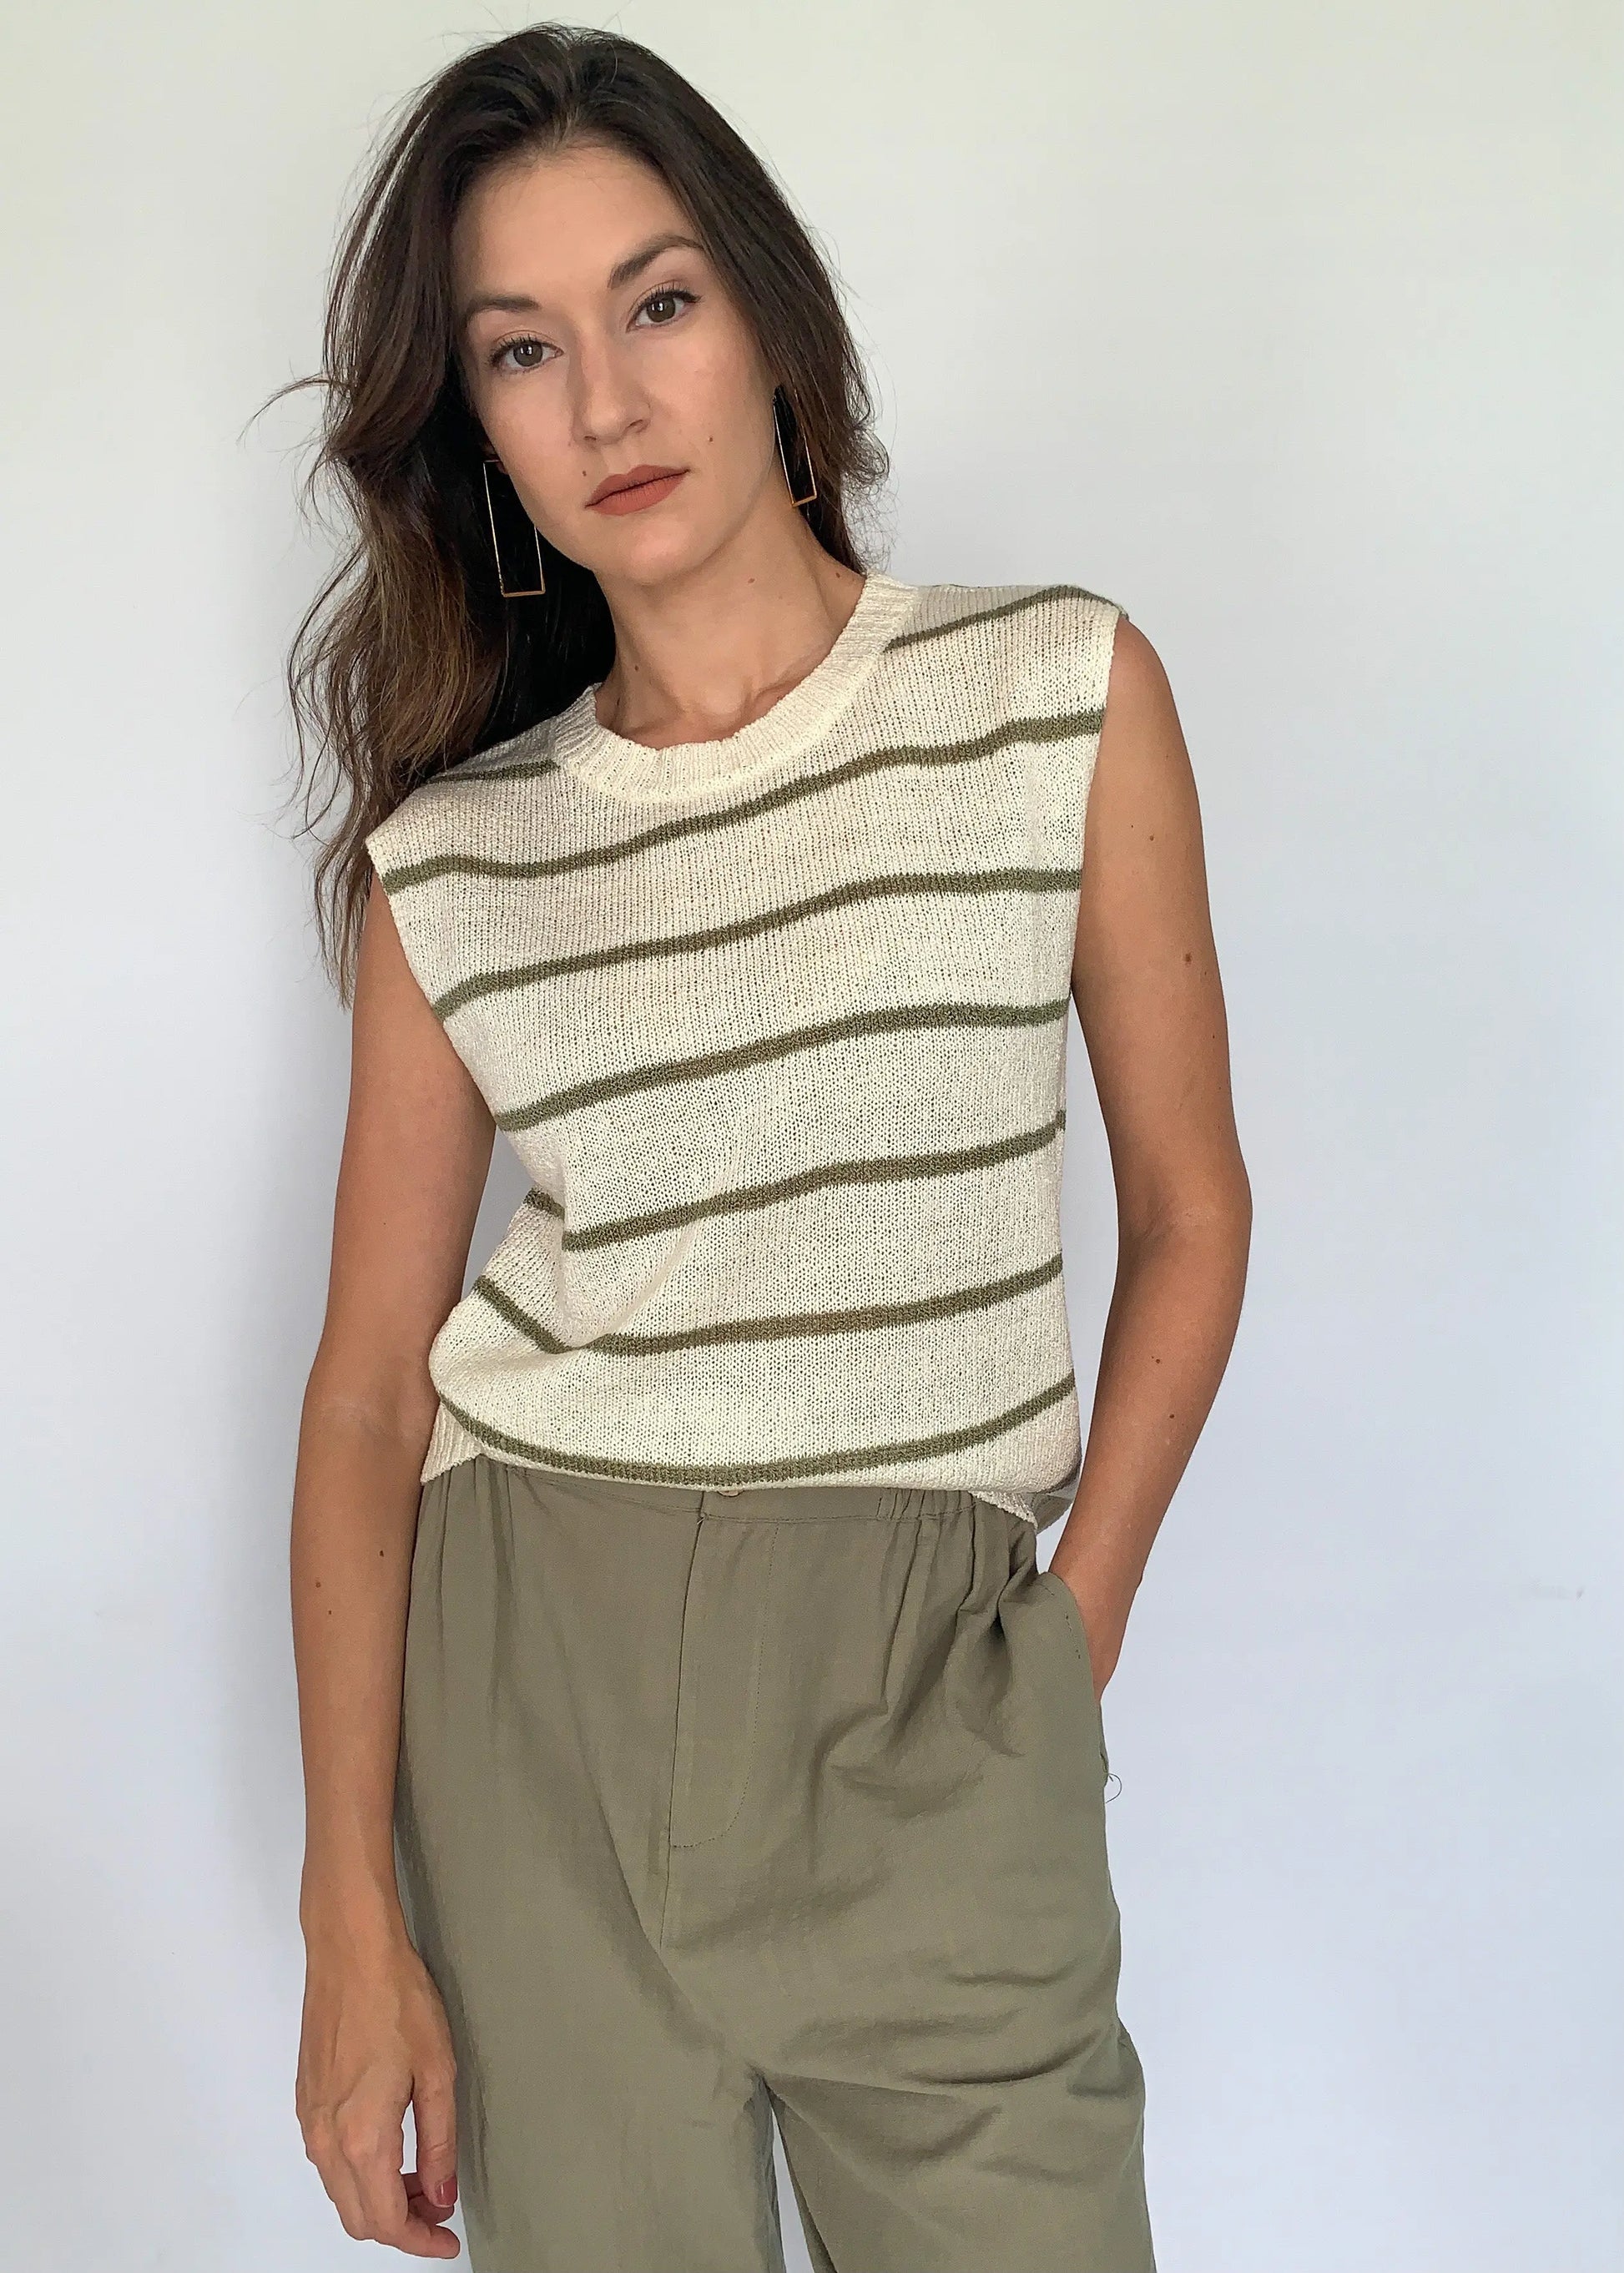 The Tiny Details Olive & Cream Horizontal Stripe Knit Pullover *Size Large*